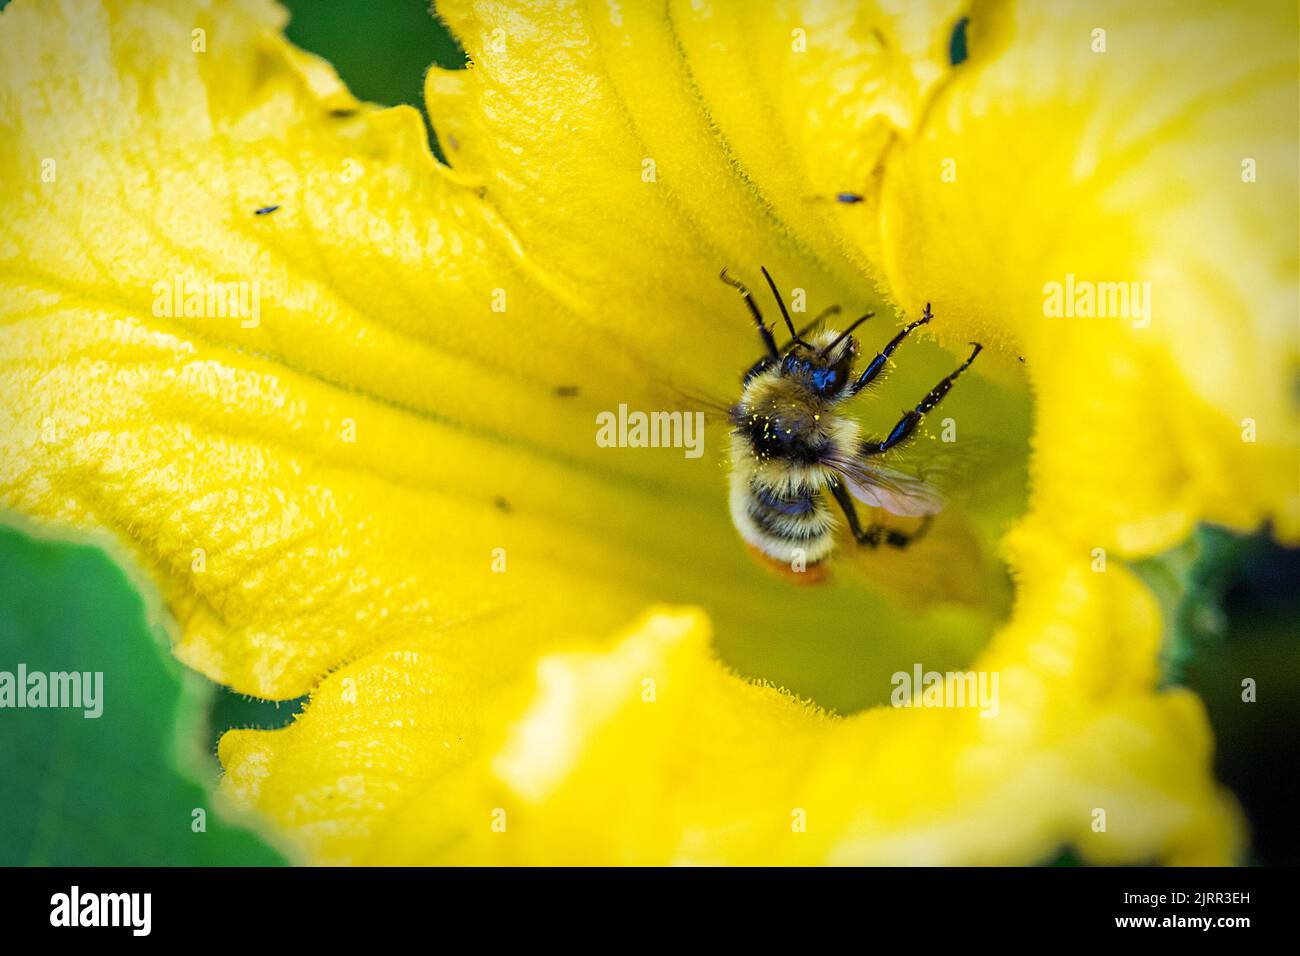 Closeup of an orange-belted bumble bee covered in yellow pollen as it collects nectar in yellow flower. Also known as tricolored bumblebee, this honey Stock Photo